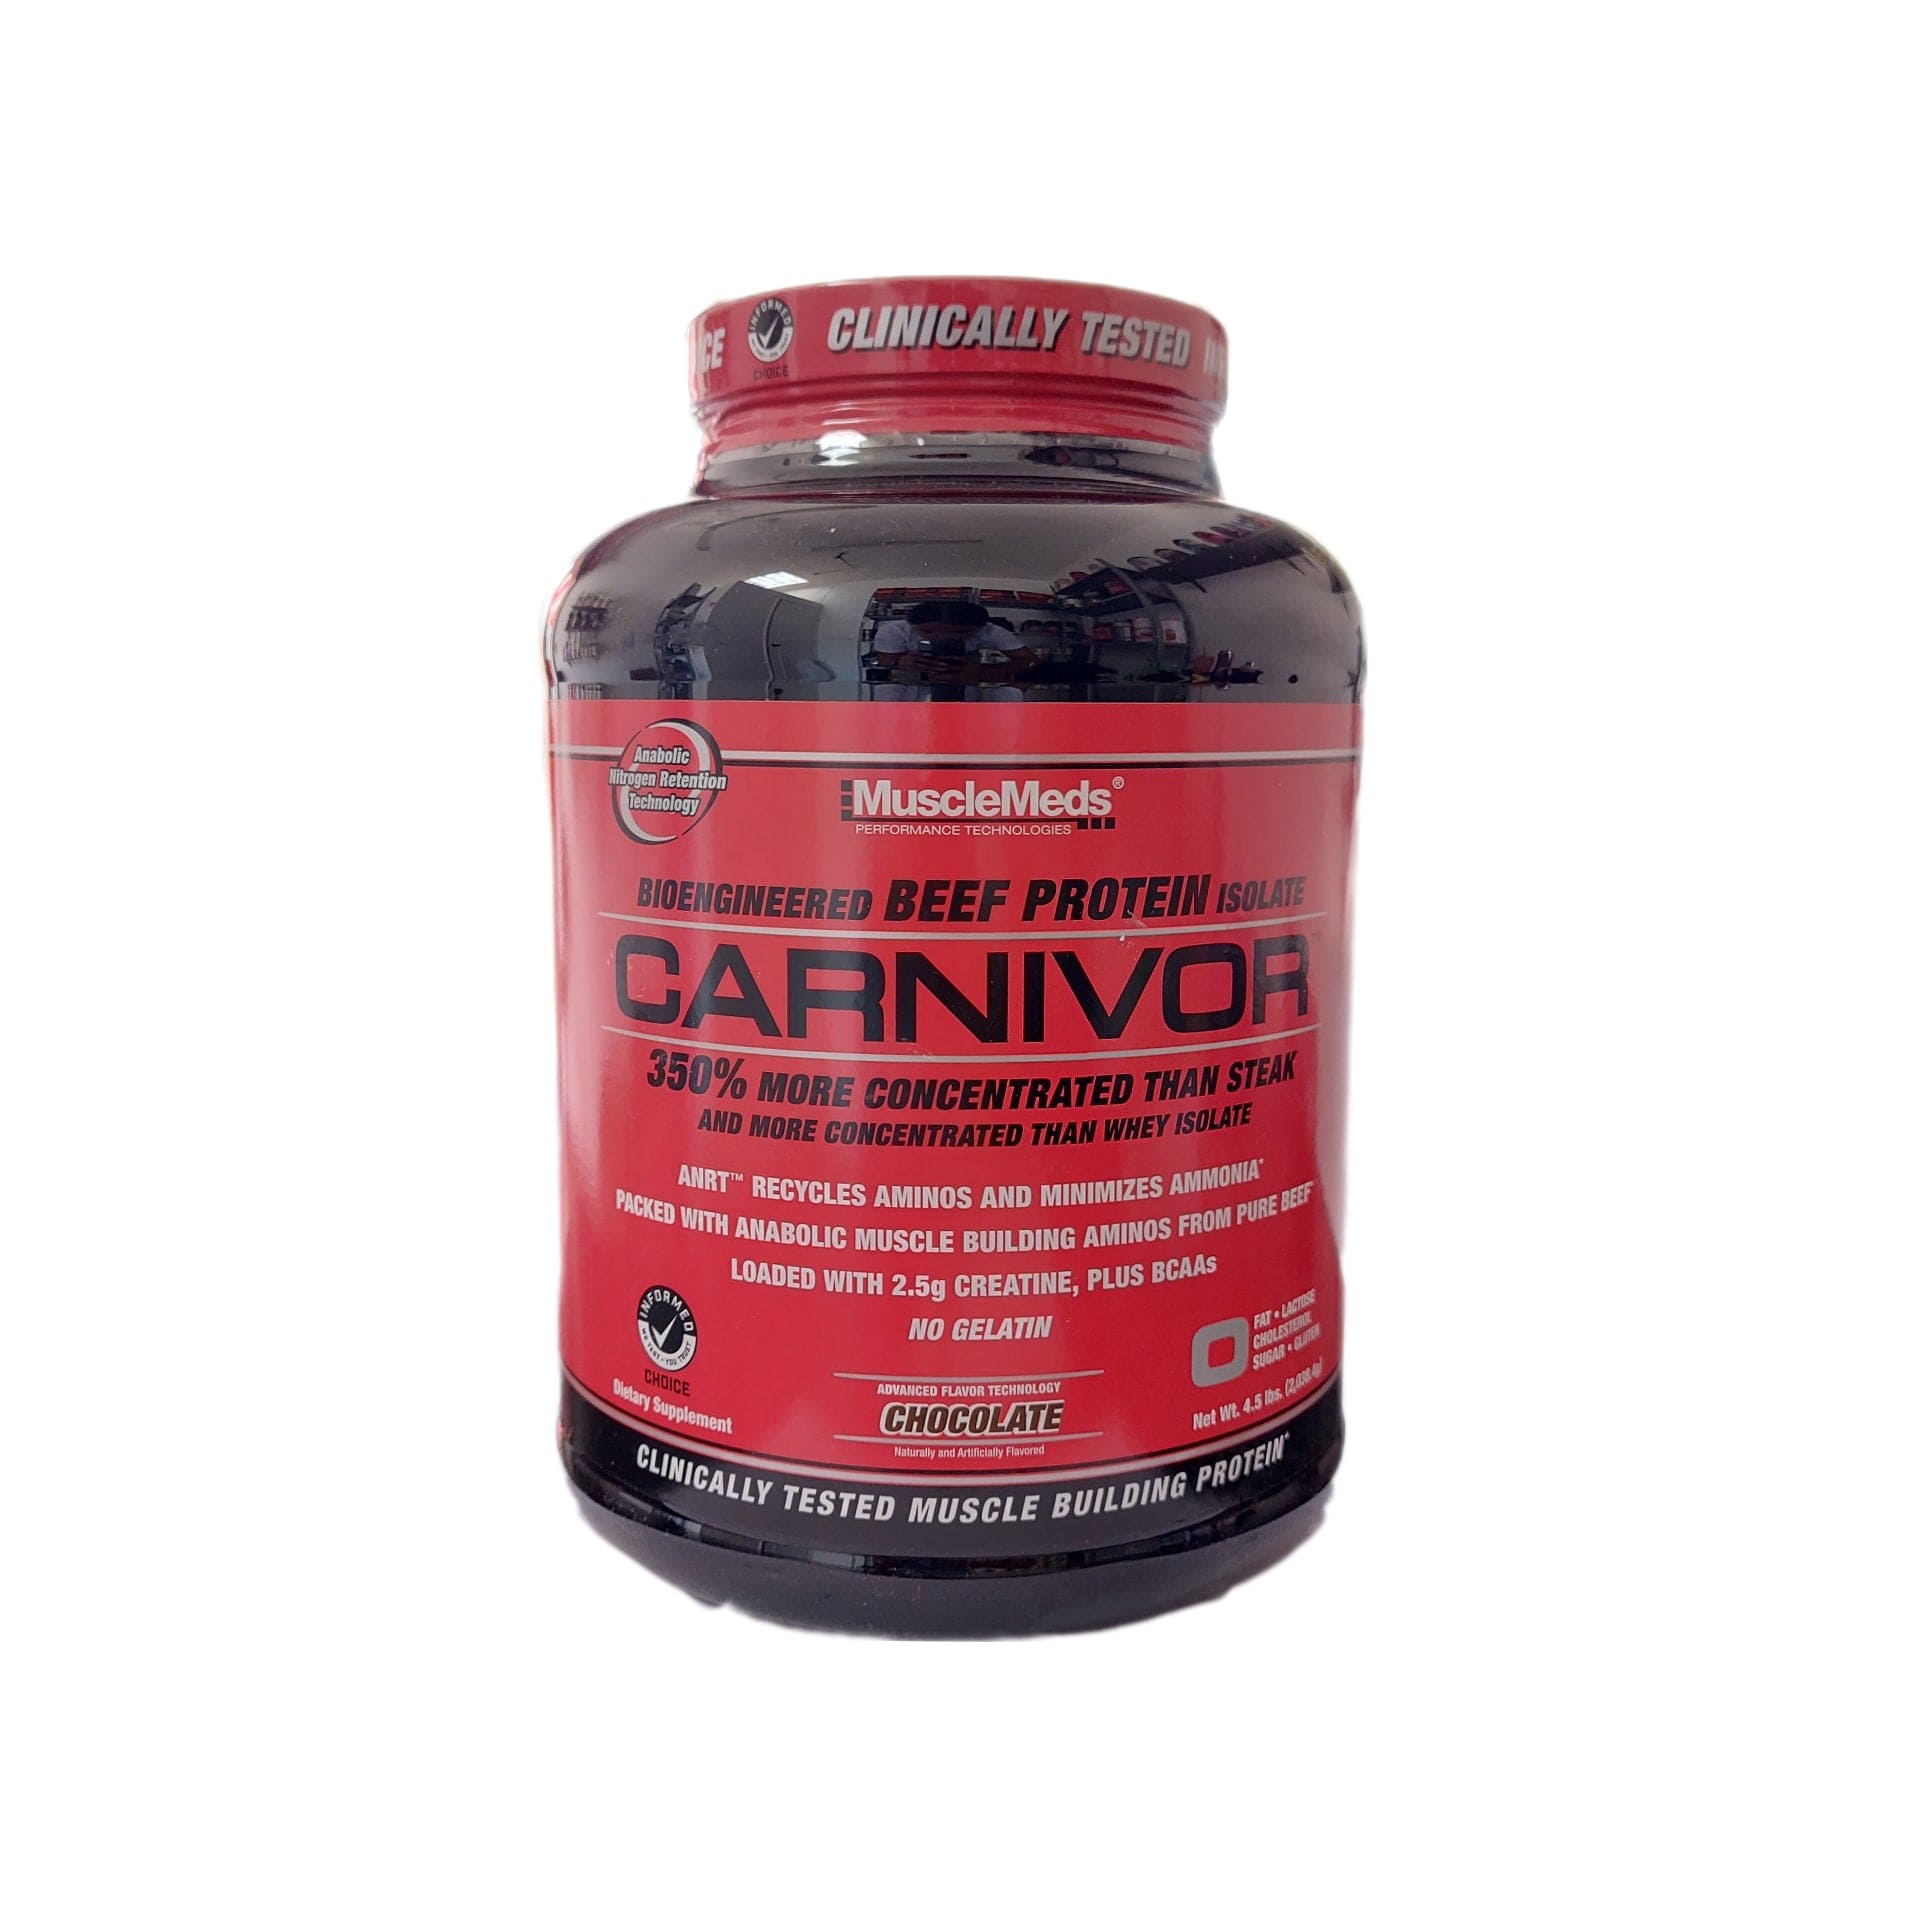 Proteina Musclemeds Carnivor 4 Lbs - Body Fit Supplements